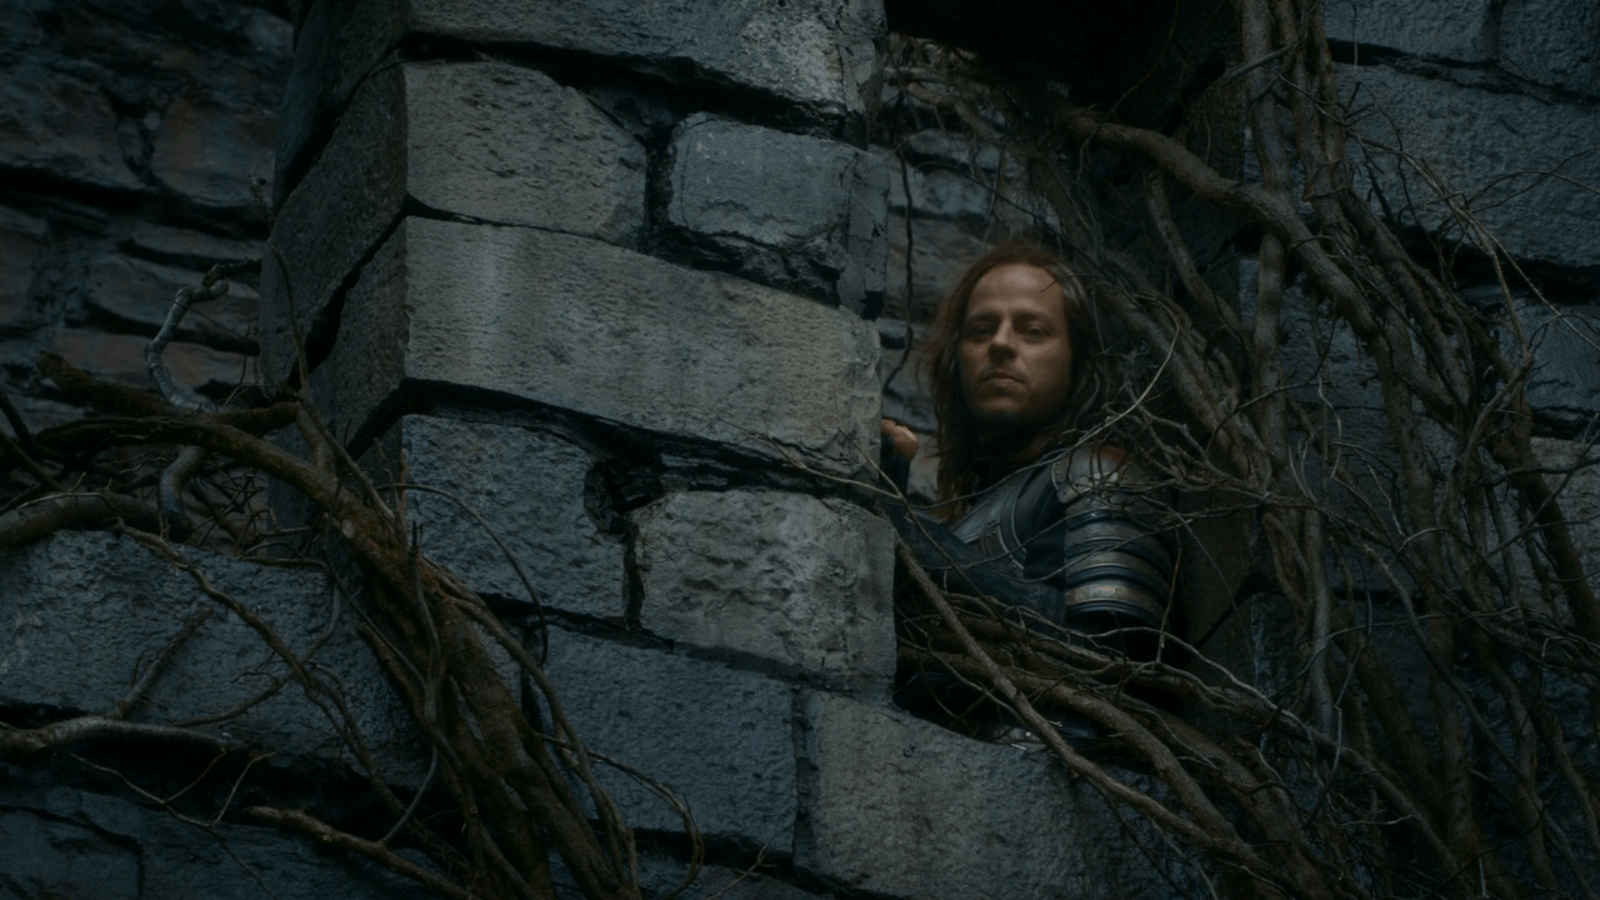 Jaqen H'ghar is one of the more inscrutable characters in George